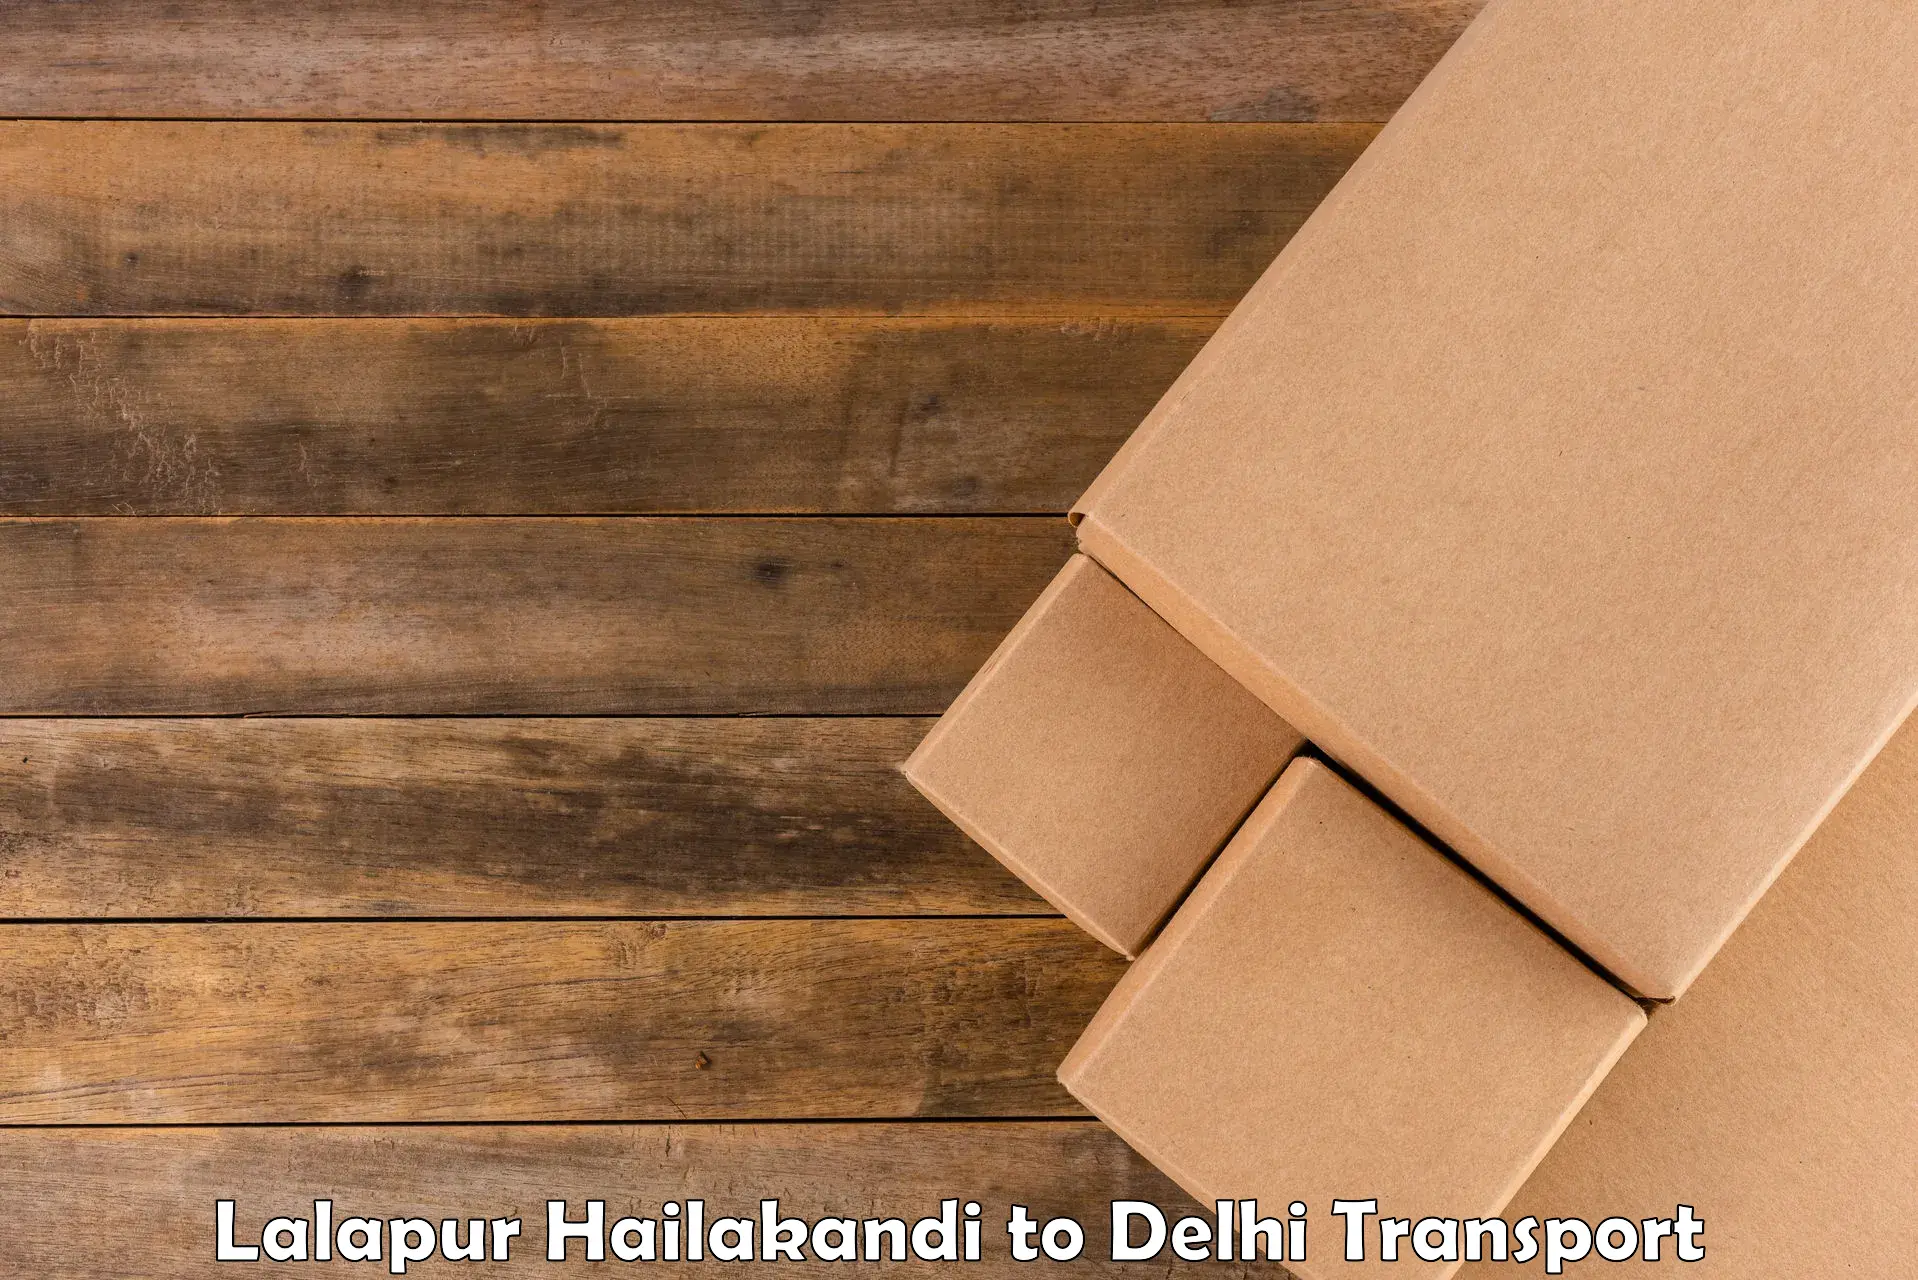 Truck transport companies in India Lalapur Hailakandi to NCR